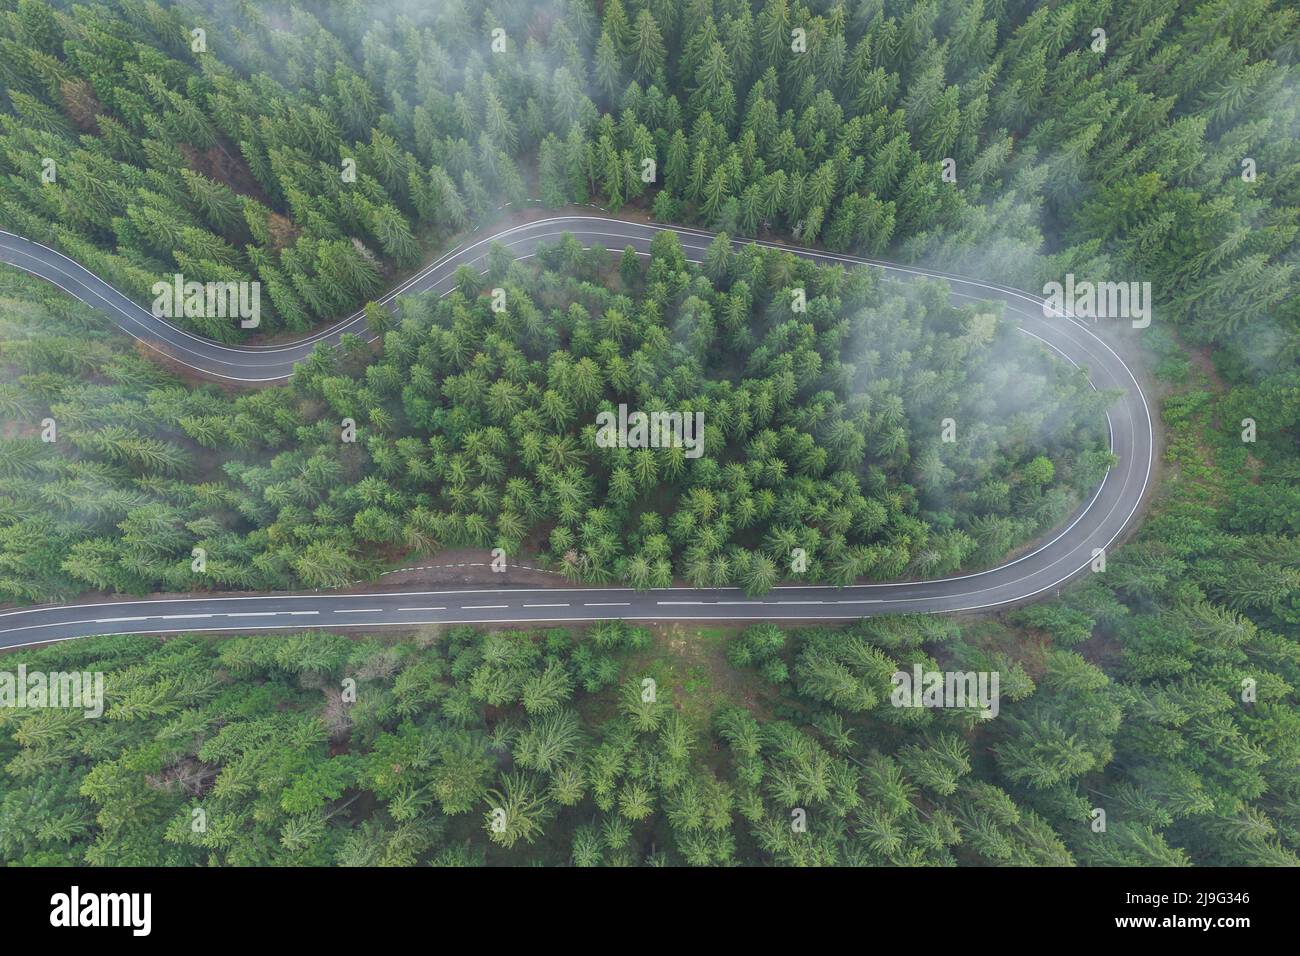 Aerial view of the mountain road in the beautiful forest in springtime. Top view of the winding road cutting through the green woods Stock Photo